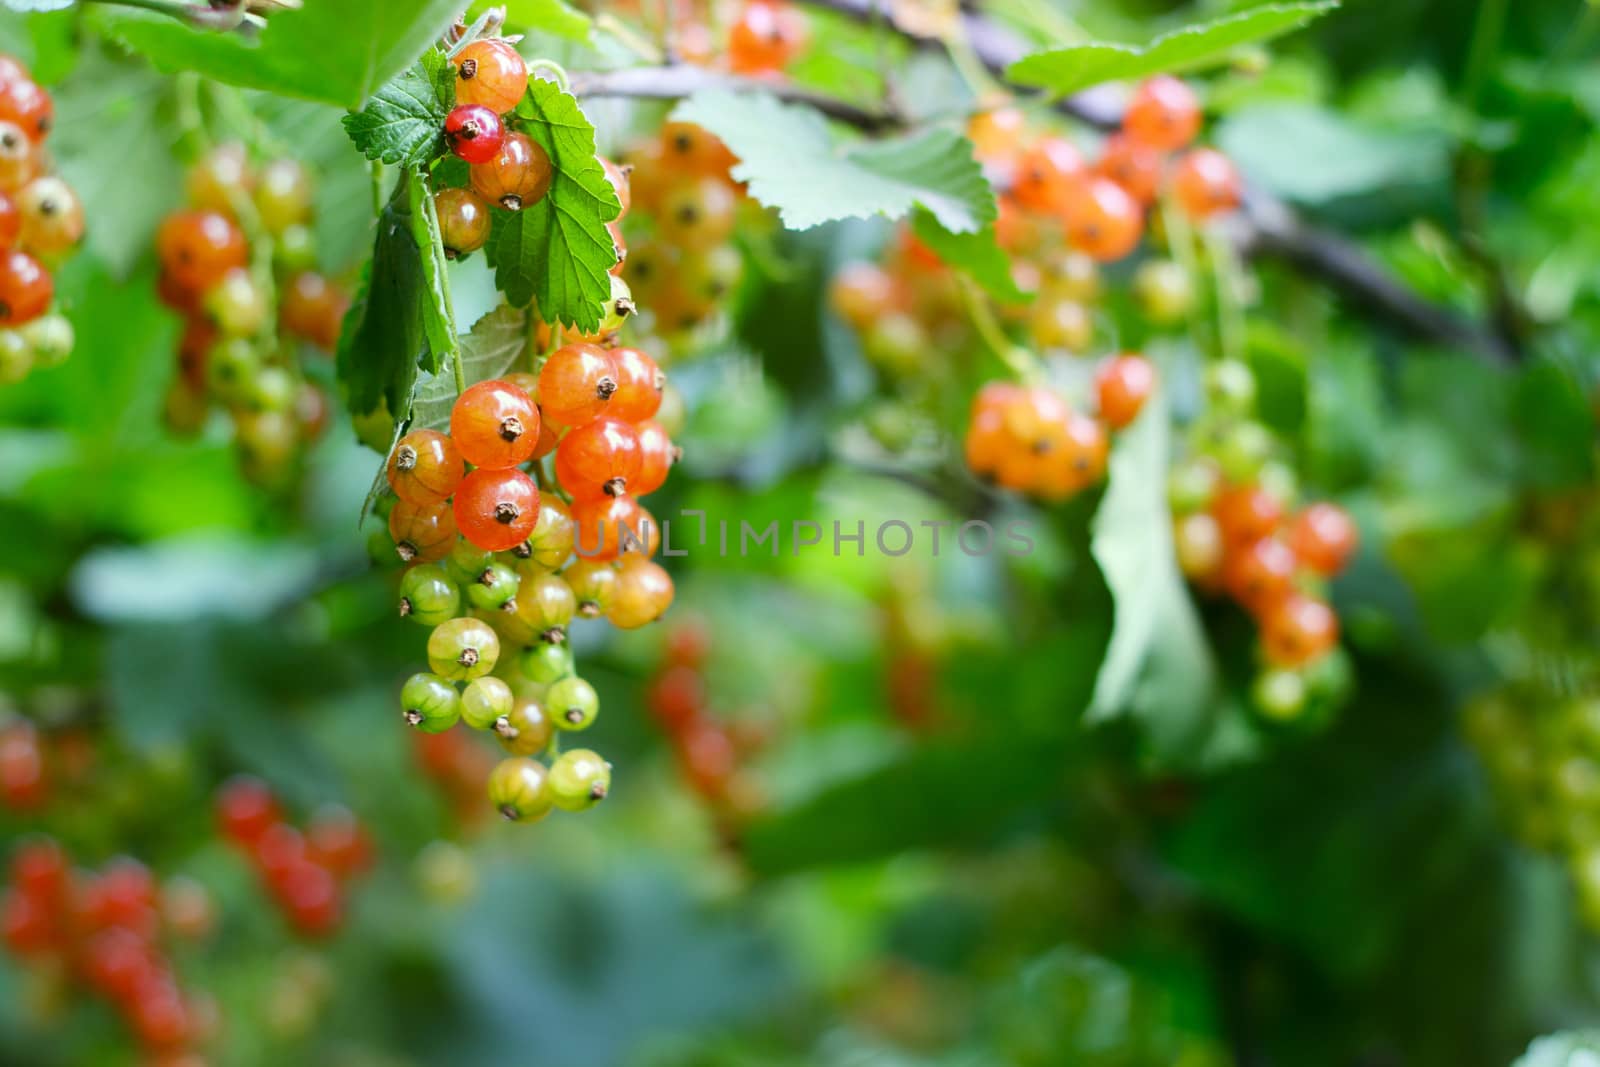 Red Currant berries on a bush closeup 